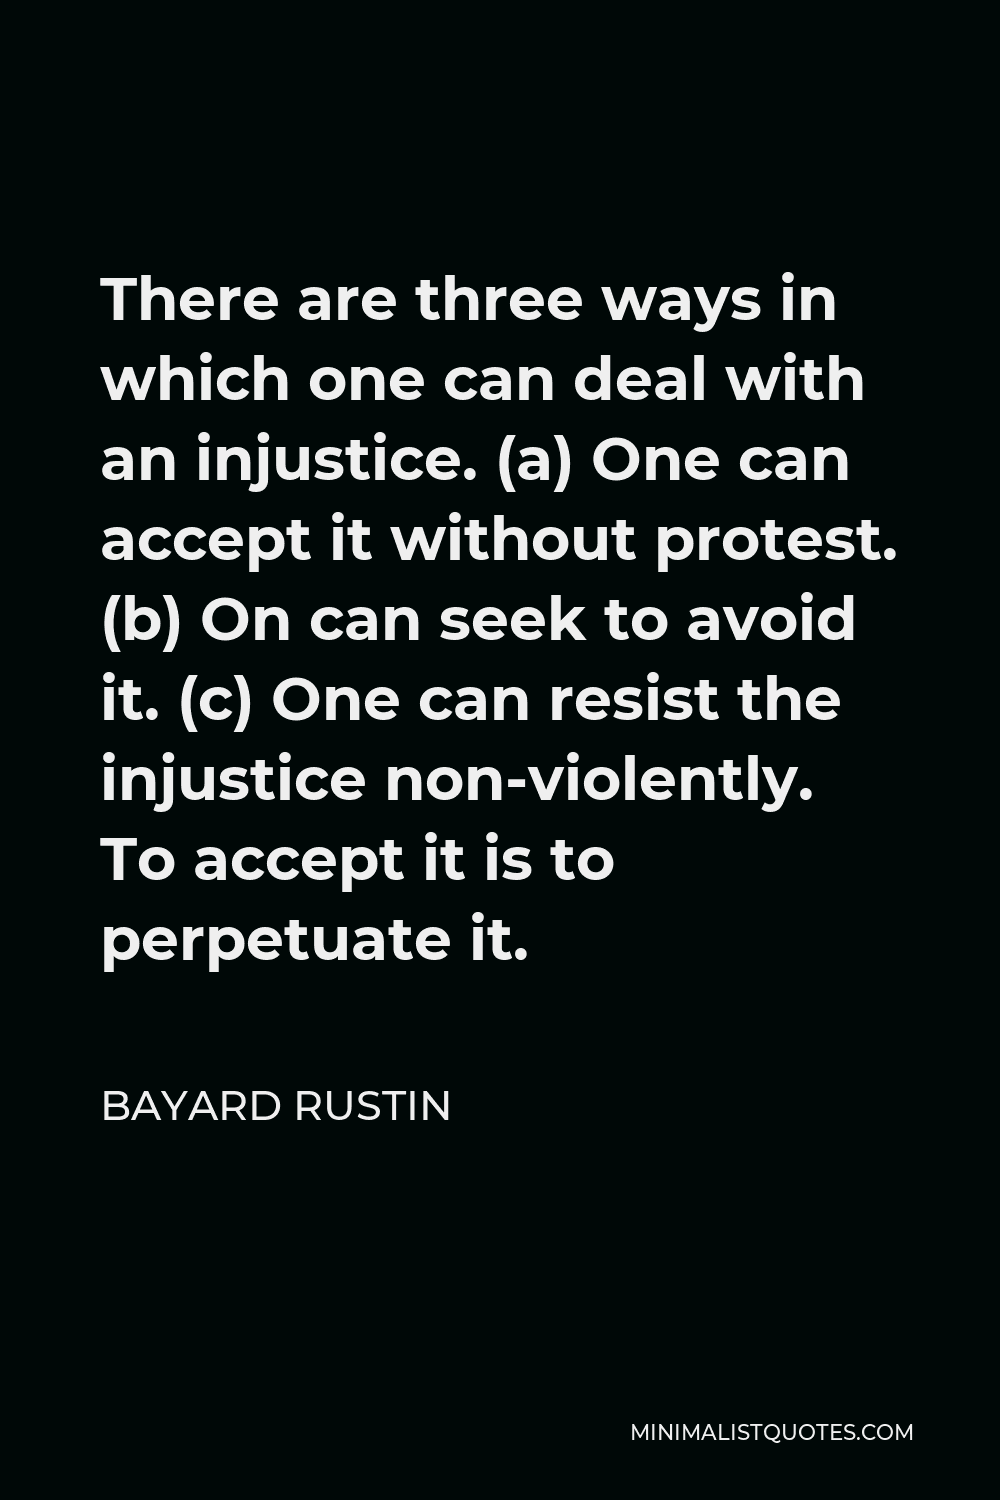 Bayard Rustin Quote - There are three ways in which one can deal with an injustice. (a) One can accept it without protest. (b) On can seek to avoid it. (c) One can resist the injustice non-violently. To accept it is to perpetuate it.